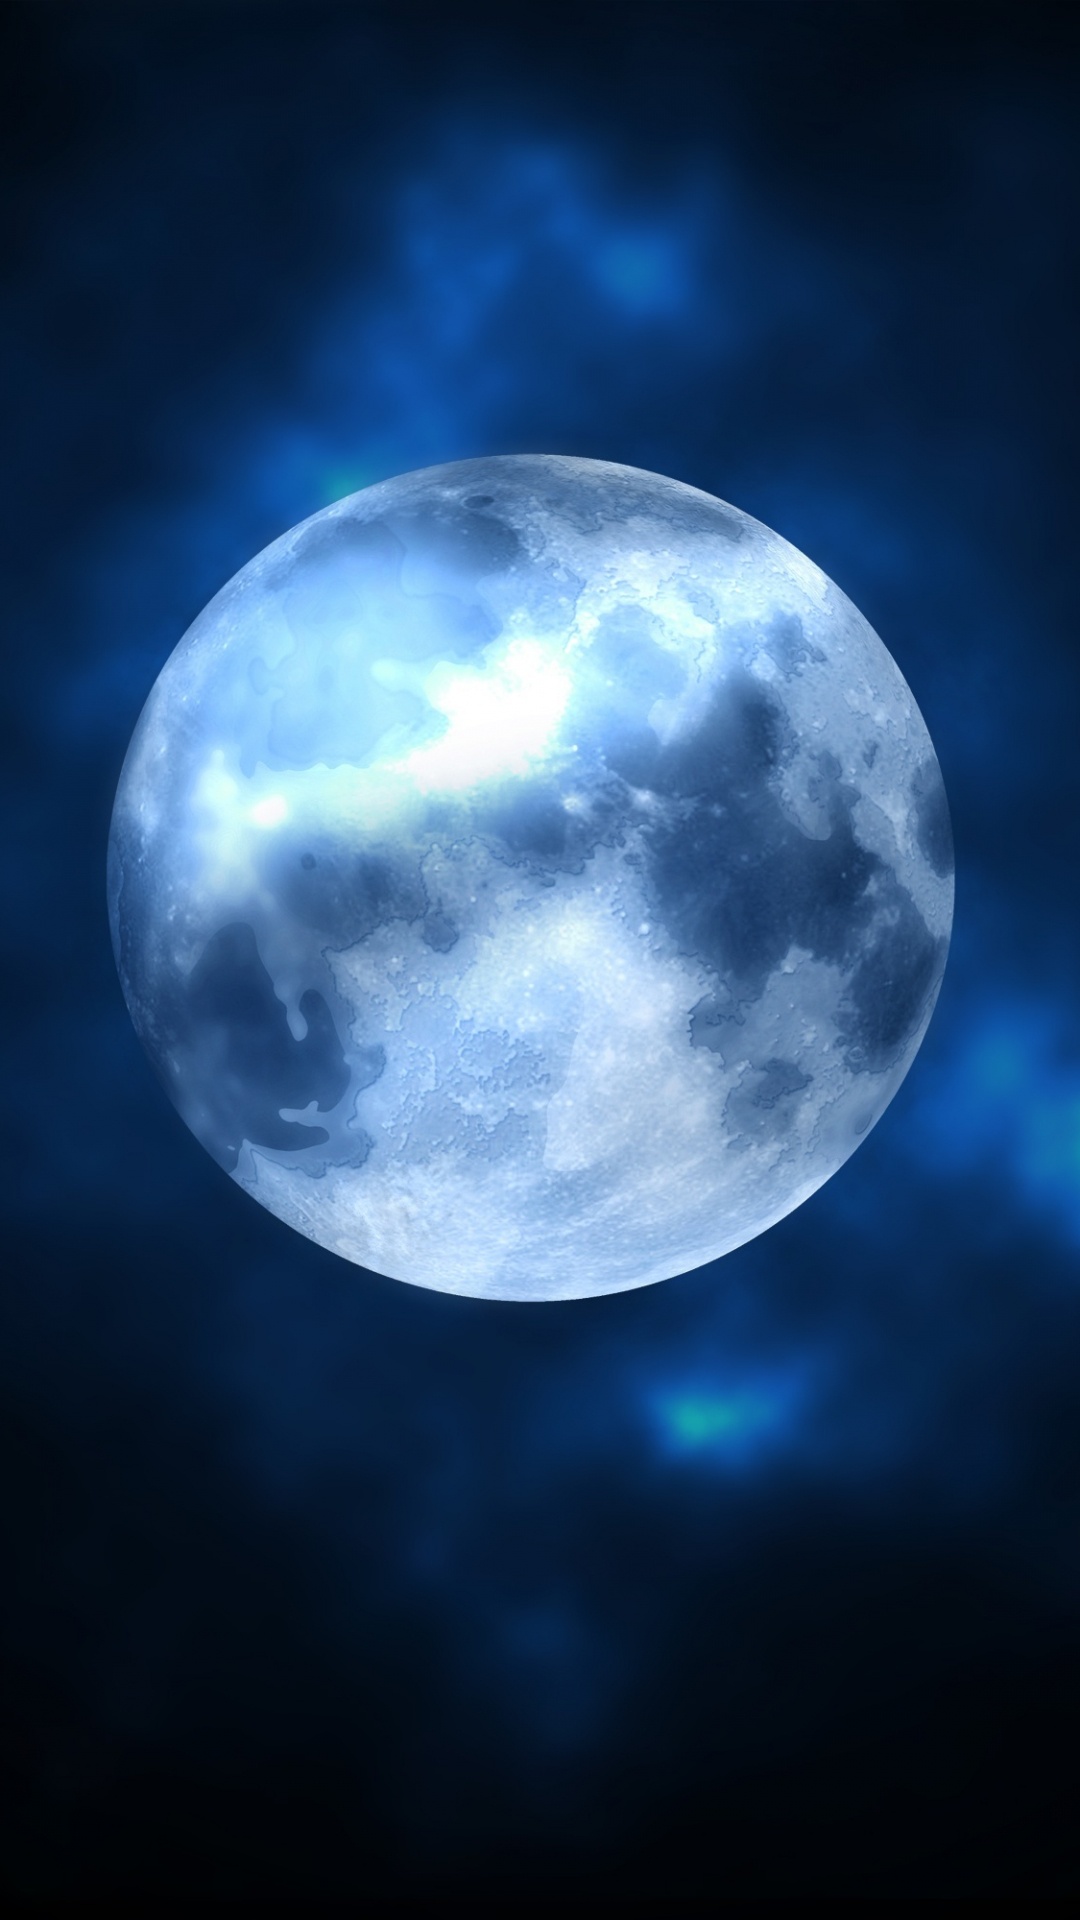 Blue and White Moon Illustration. Wallpaper in 1080x1920 Resolution